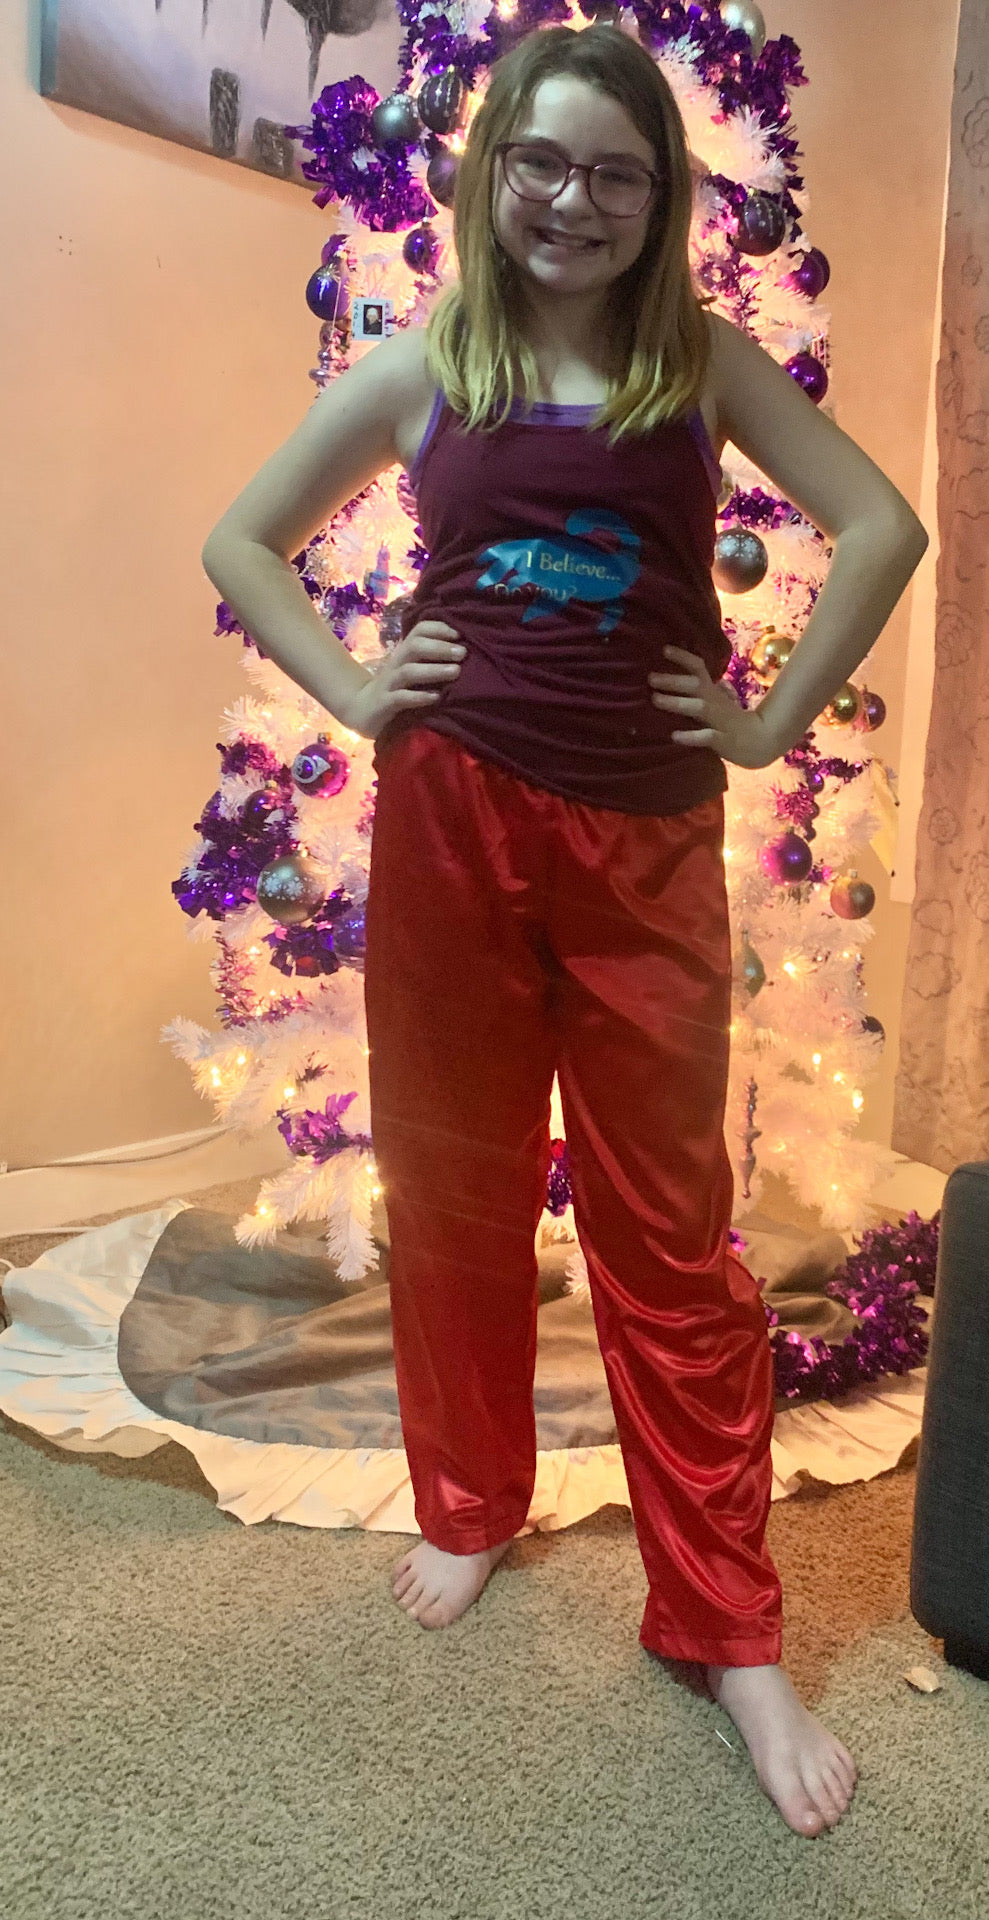 Lounge Pants Adult Sizes B - M and Children Sizes 3-14